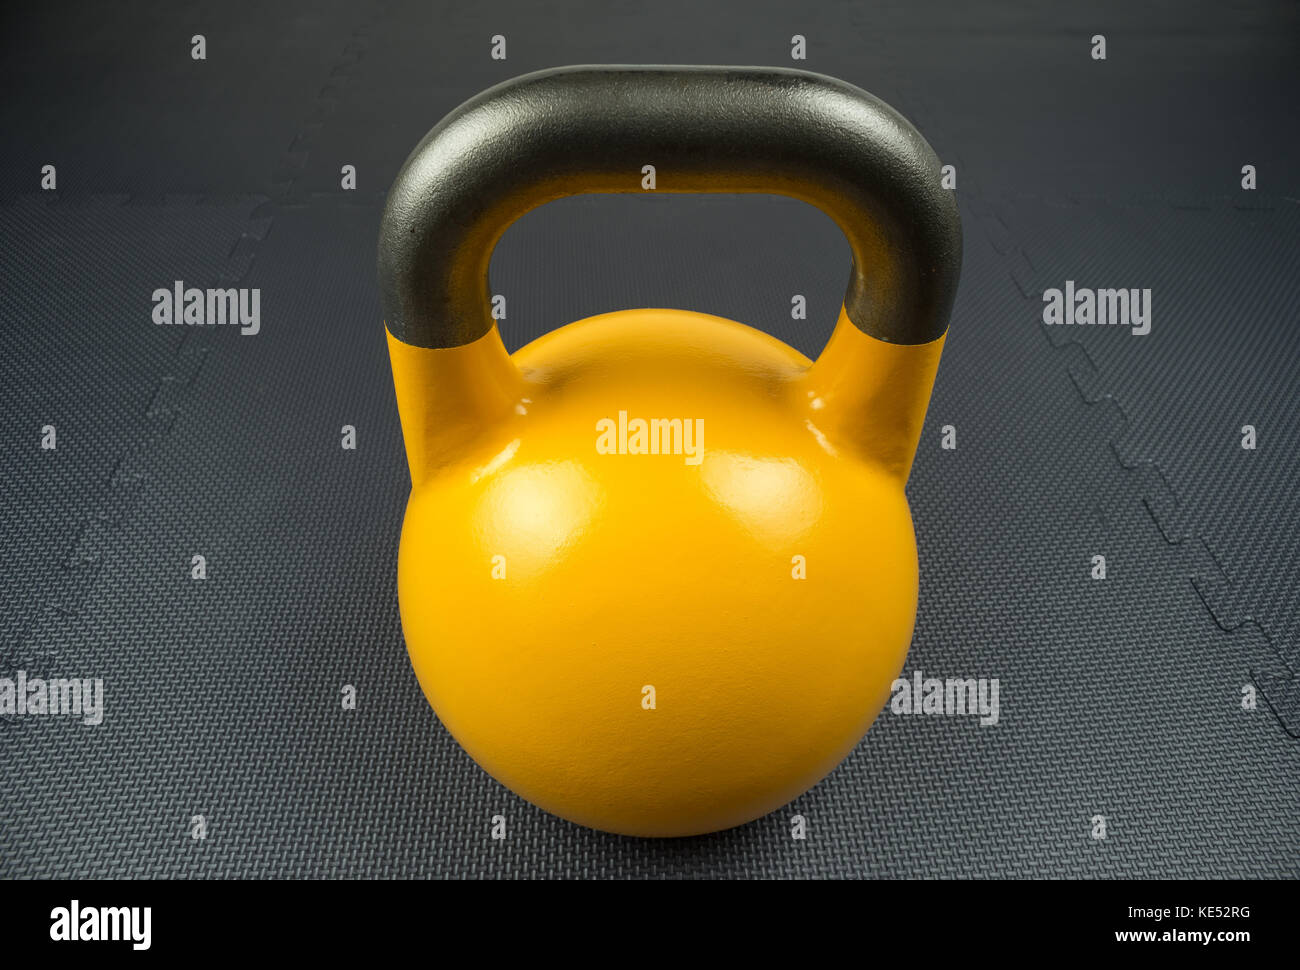 Yellow 16kg competition kettlebell on a fitness studio gym floor with rubber tiles. Potential text / writing space at center of kettlebell. Stock Photo